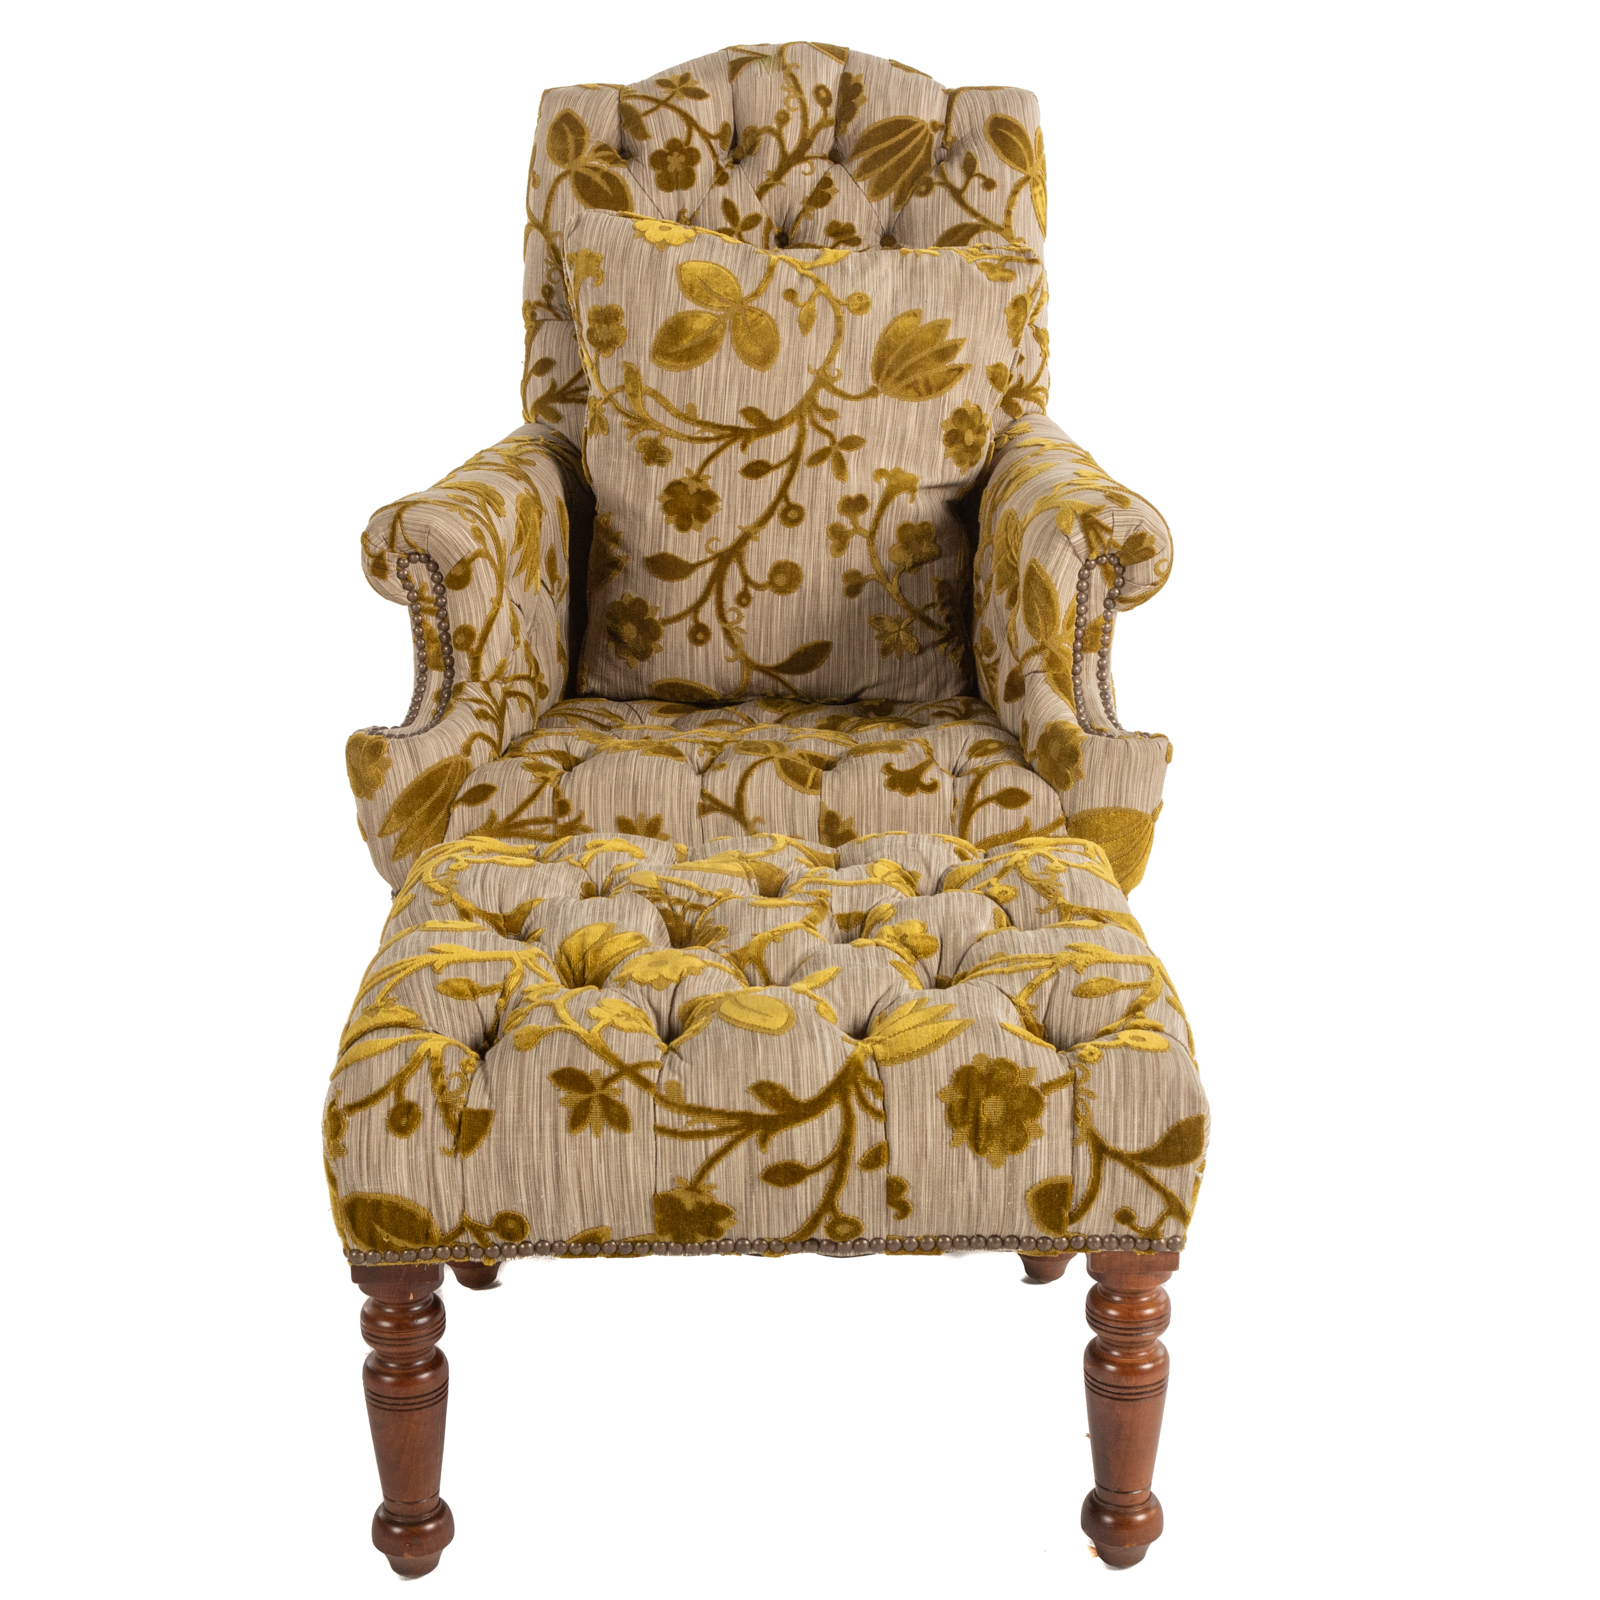 TUFTED UPHOLSTERED CHAIR & OTTOMAN